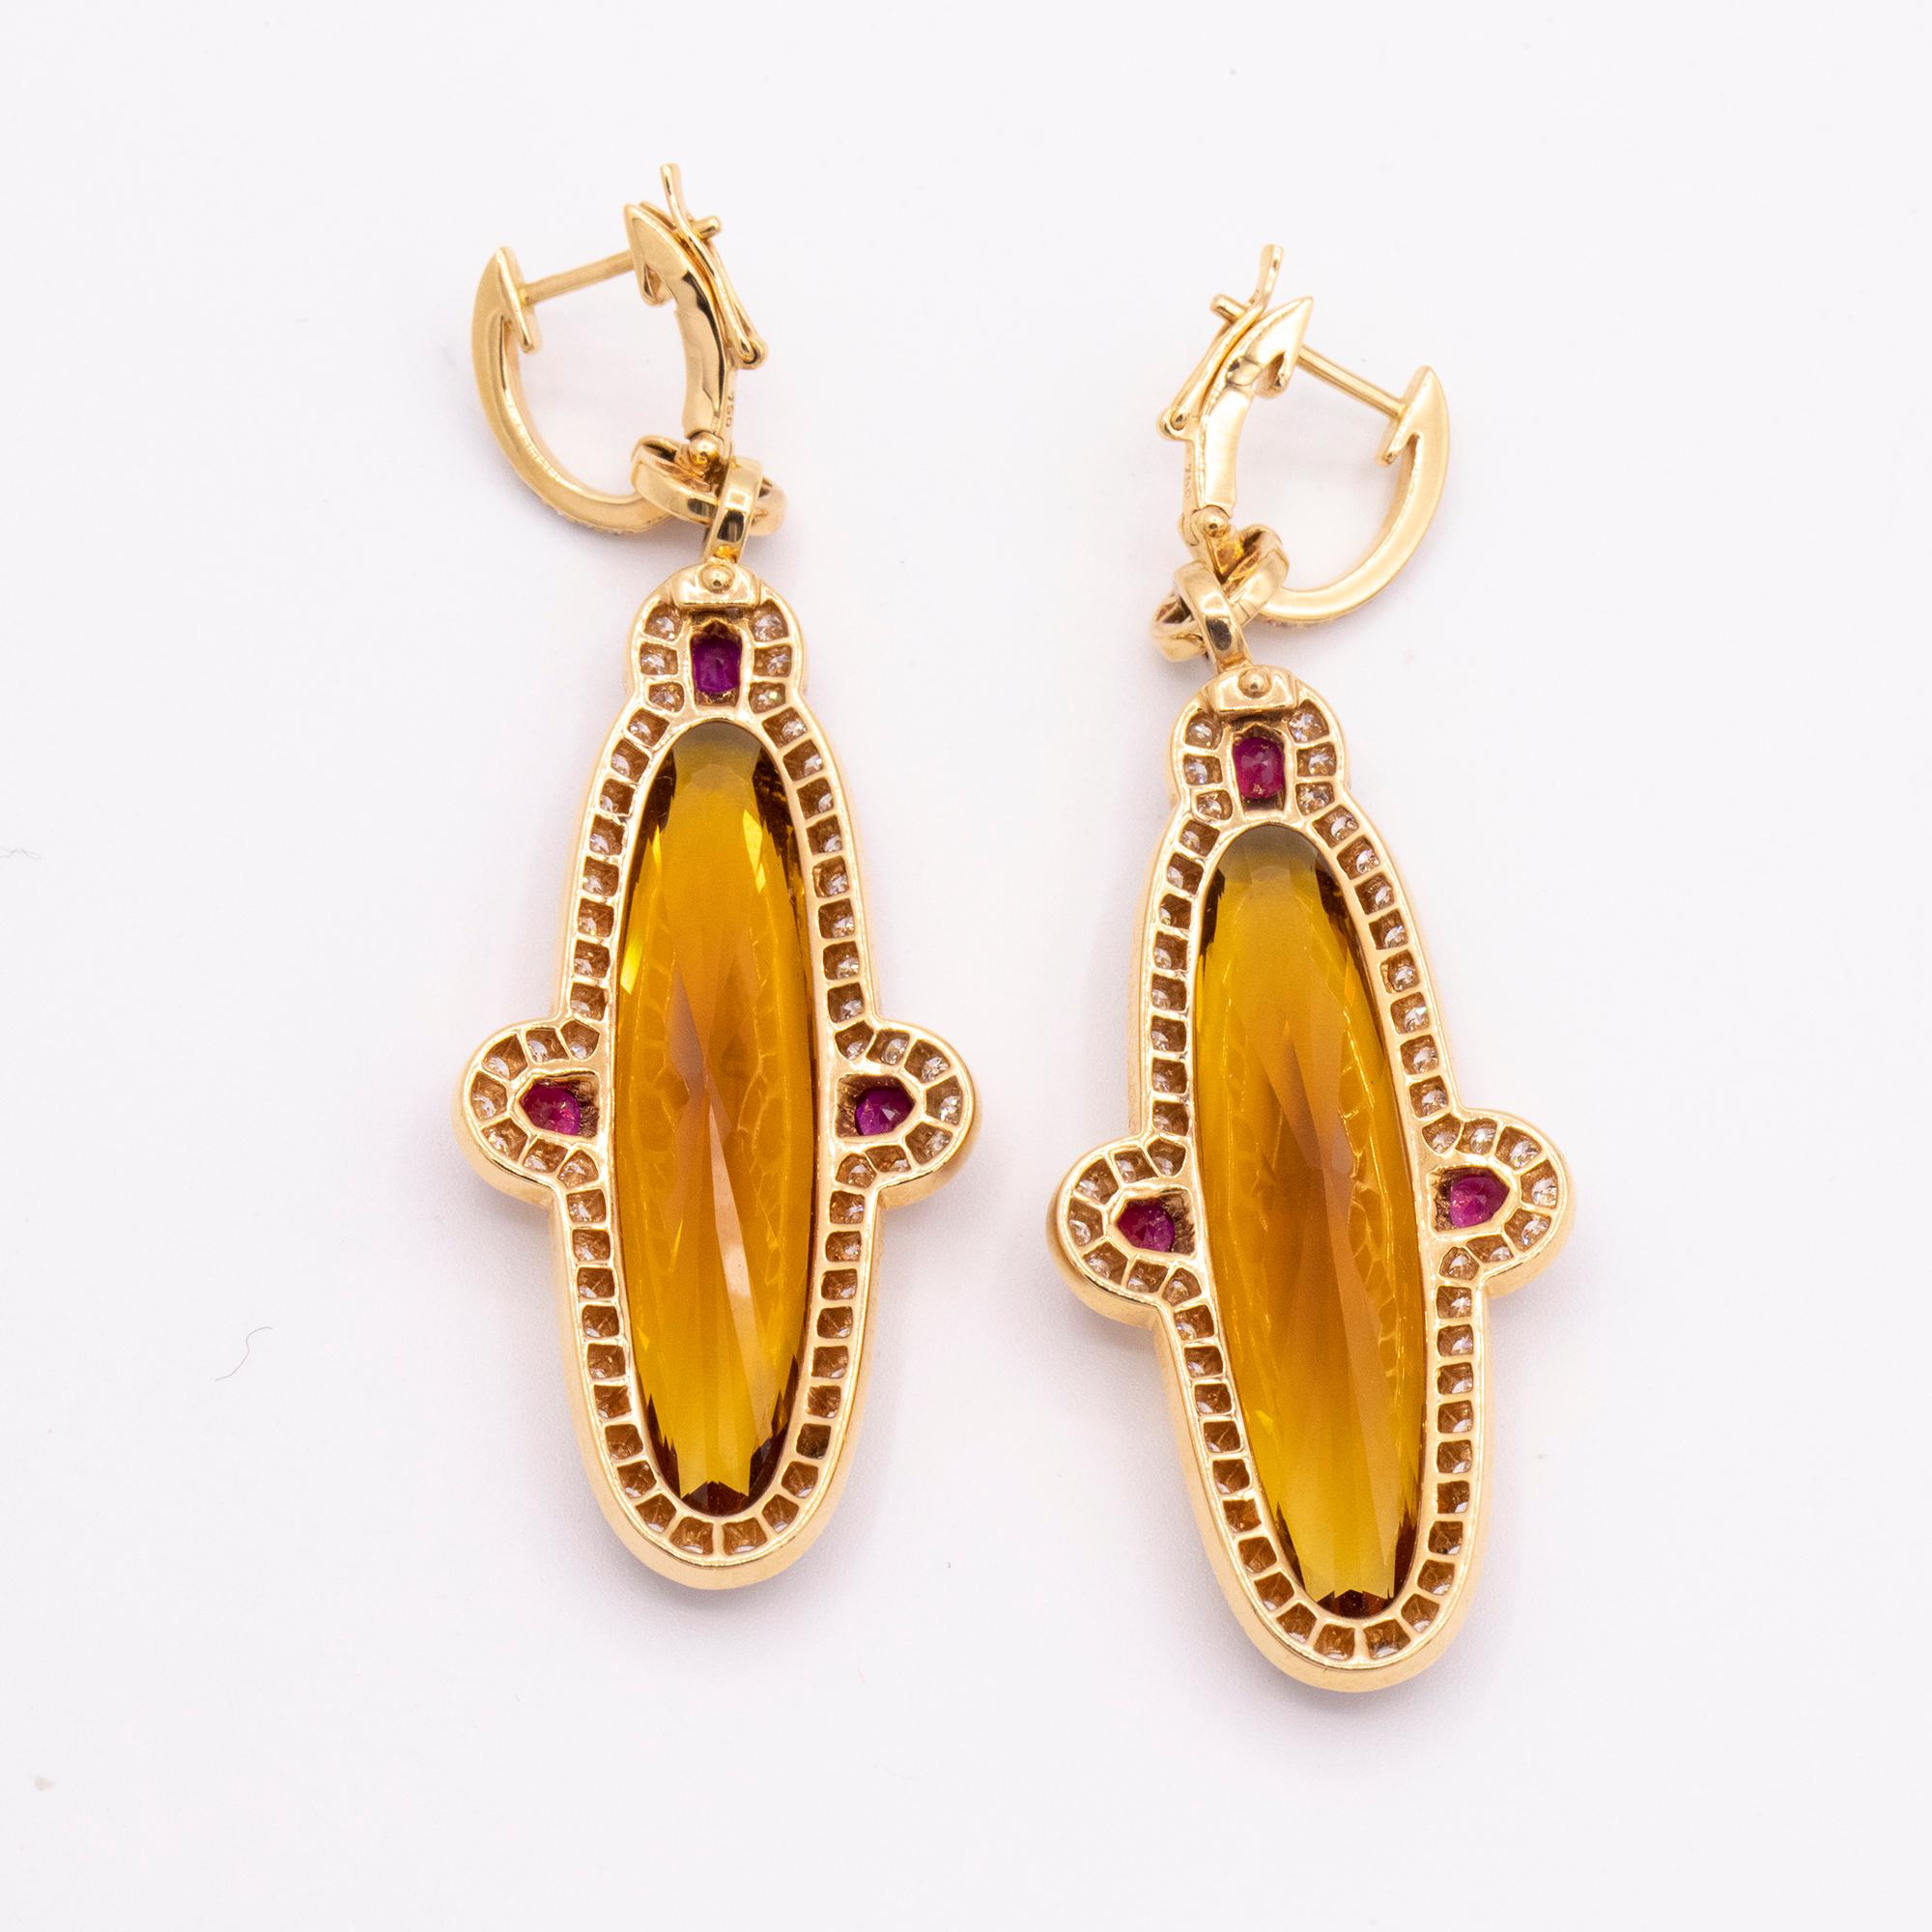 From Hamilton's Gemstone Collection, handmade drop earrings set in 18k rose gold with stunning faceted orange citrine weighing 26.84cts and rubies weighing .74cts. Framed by round brilliant diamonds. The length is 2.25